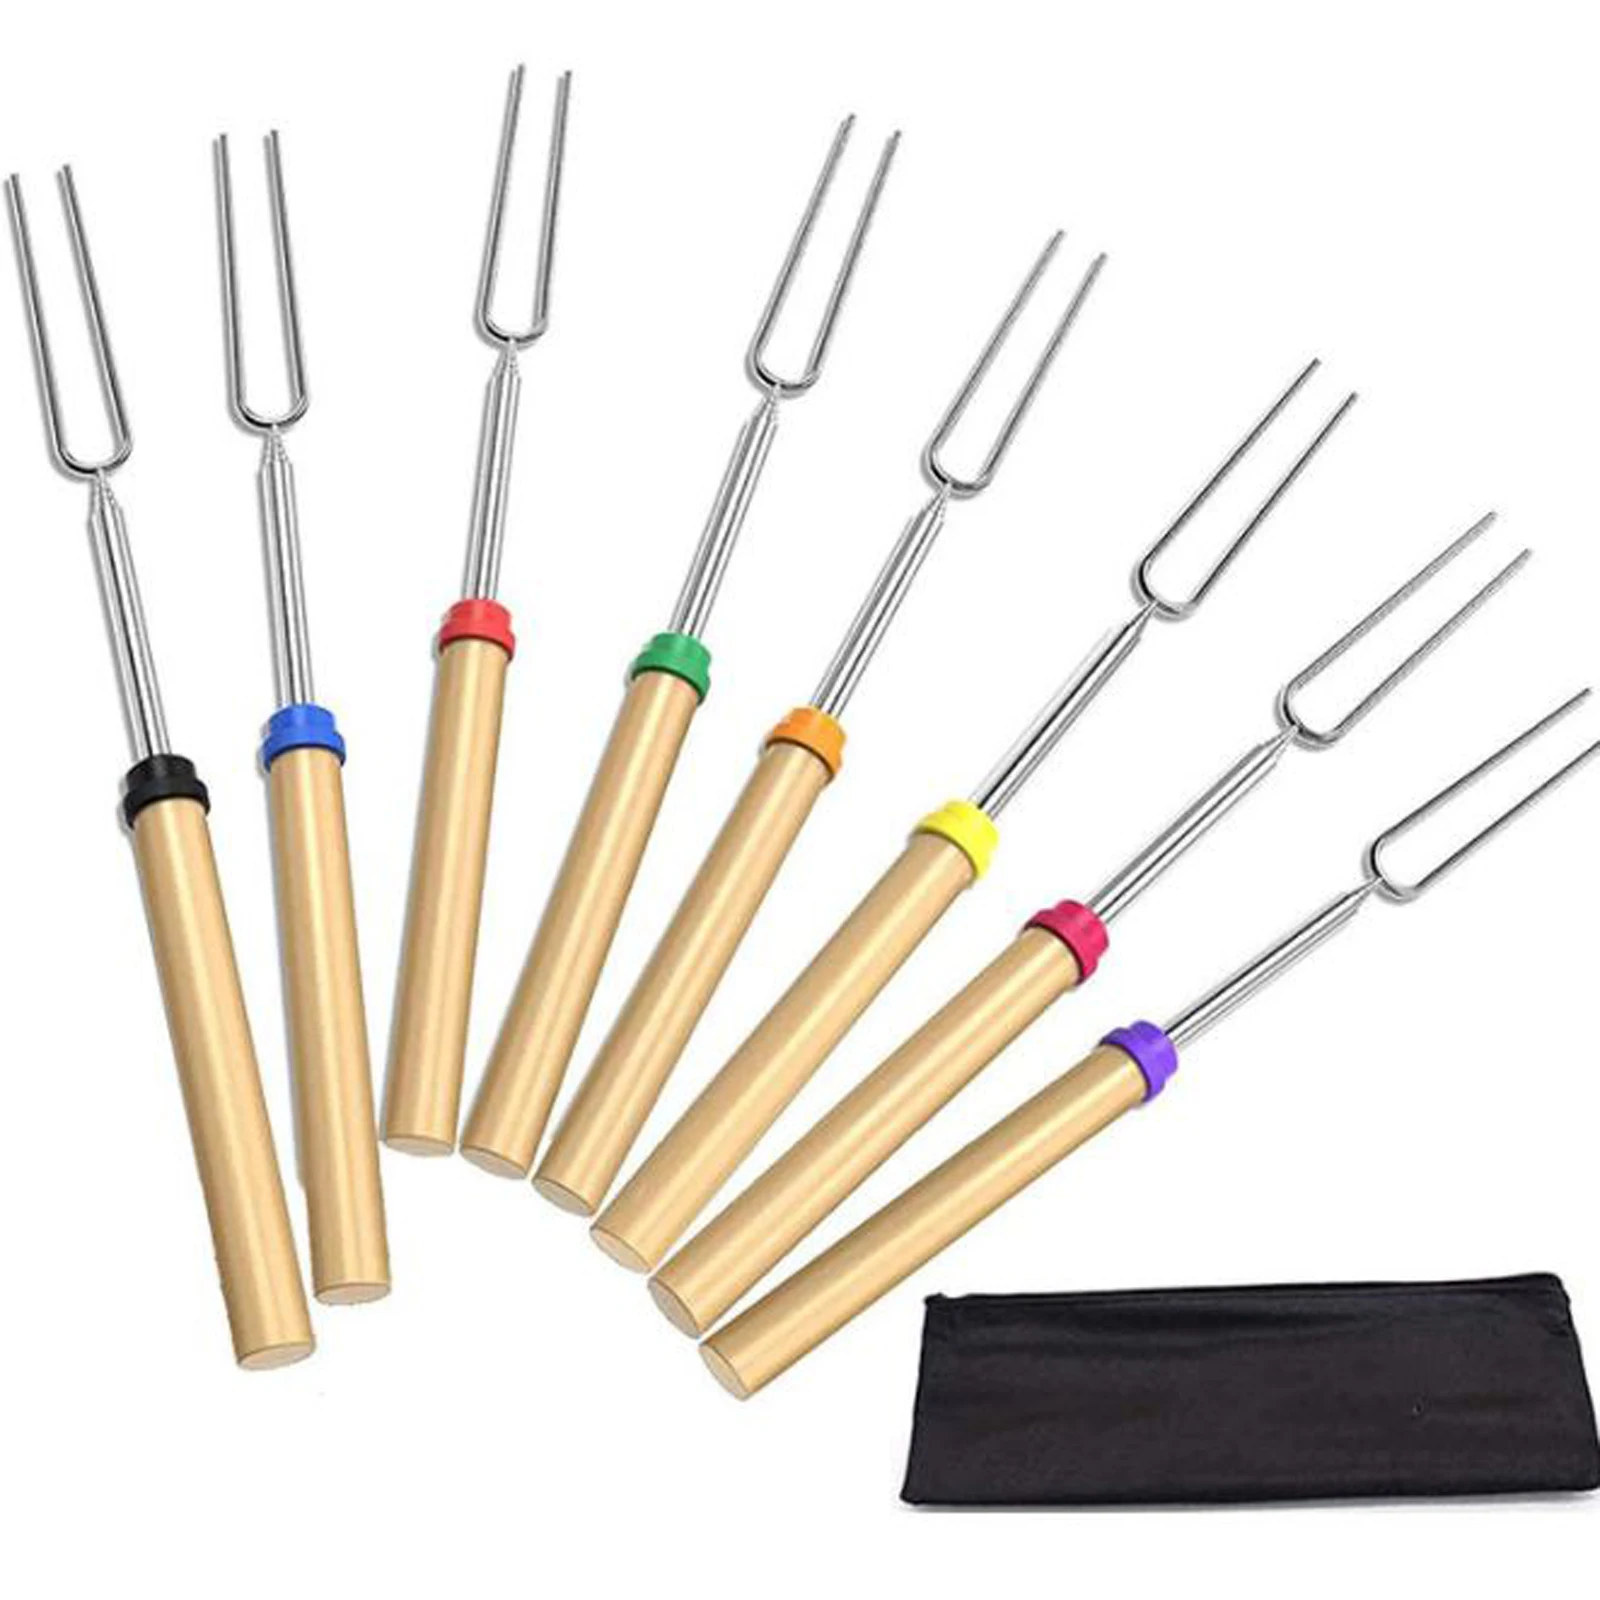 8 Pcs Marshmallow Roasting BBQ Sticks with Wooden Handle Extendable Forks Set 